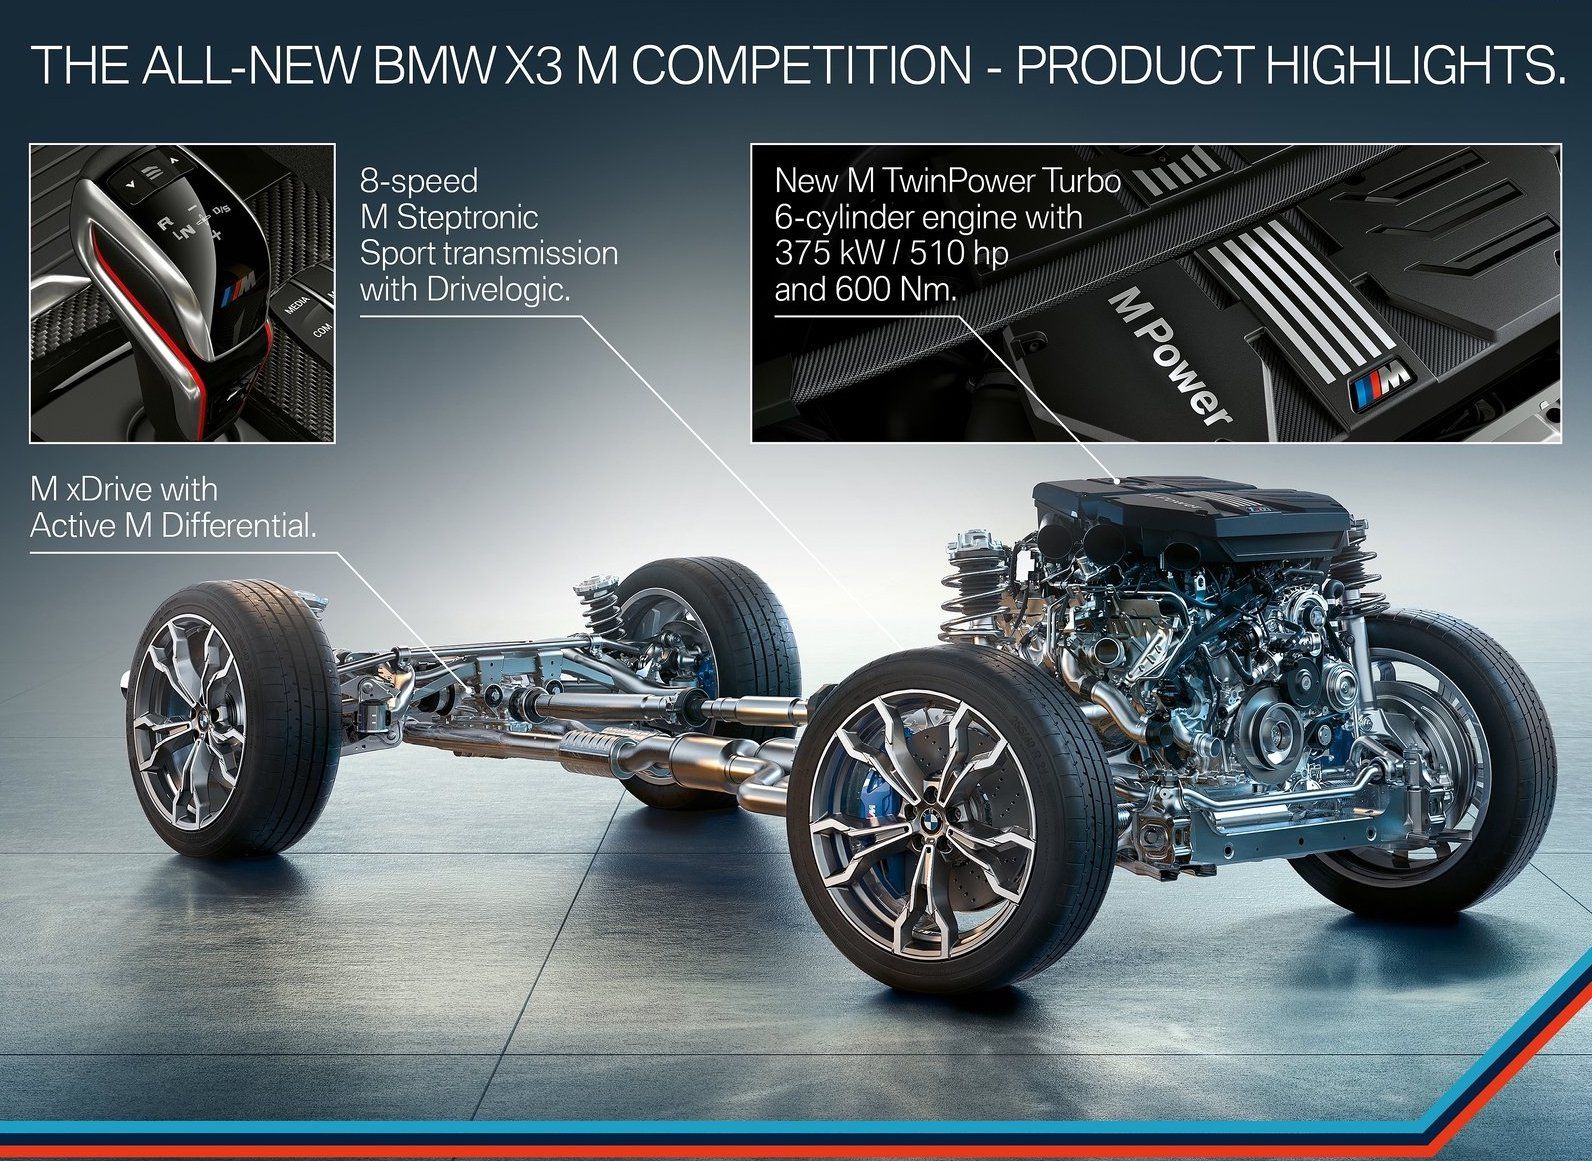 BMW X3 M Competition product highlights